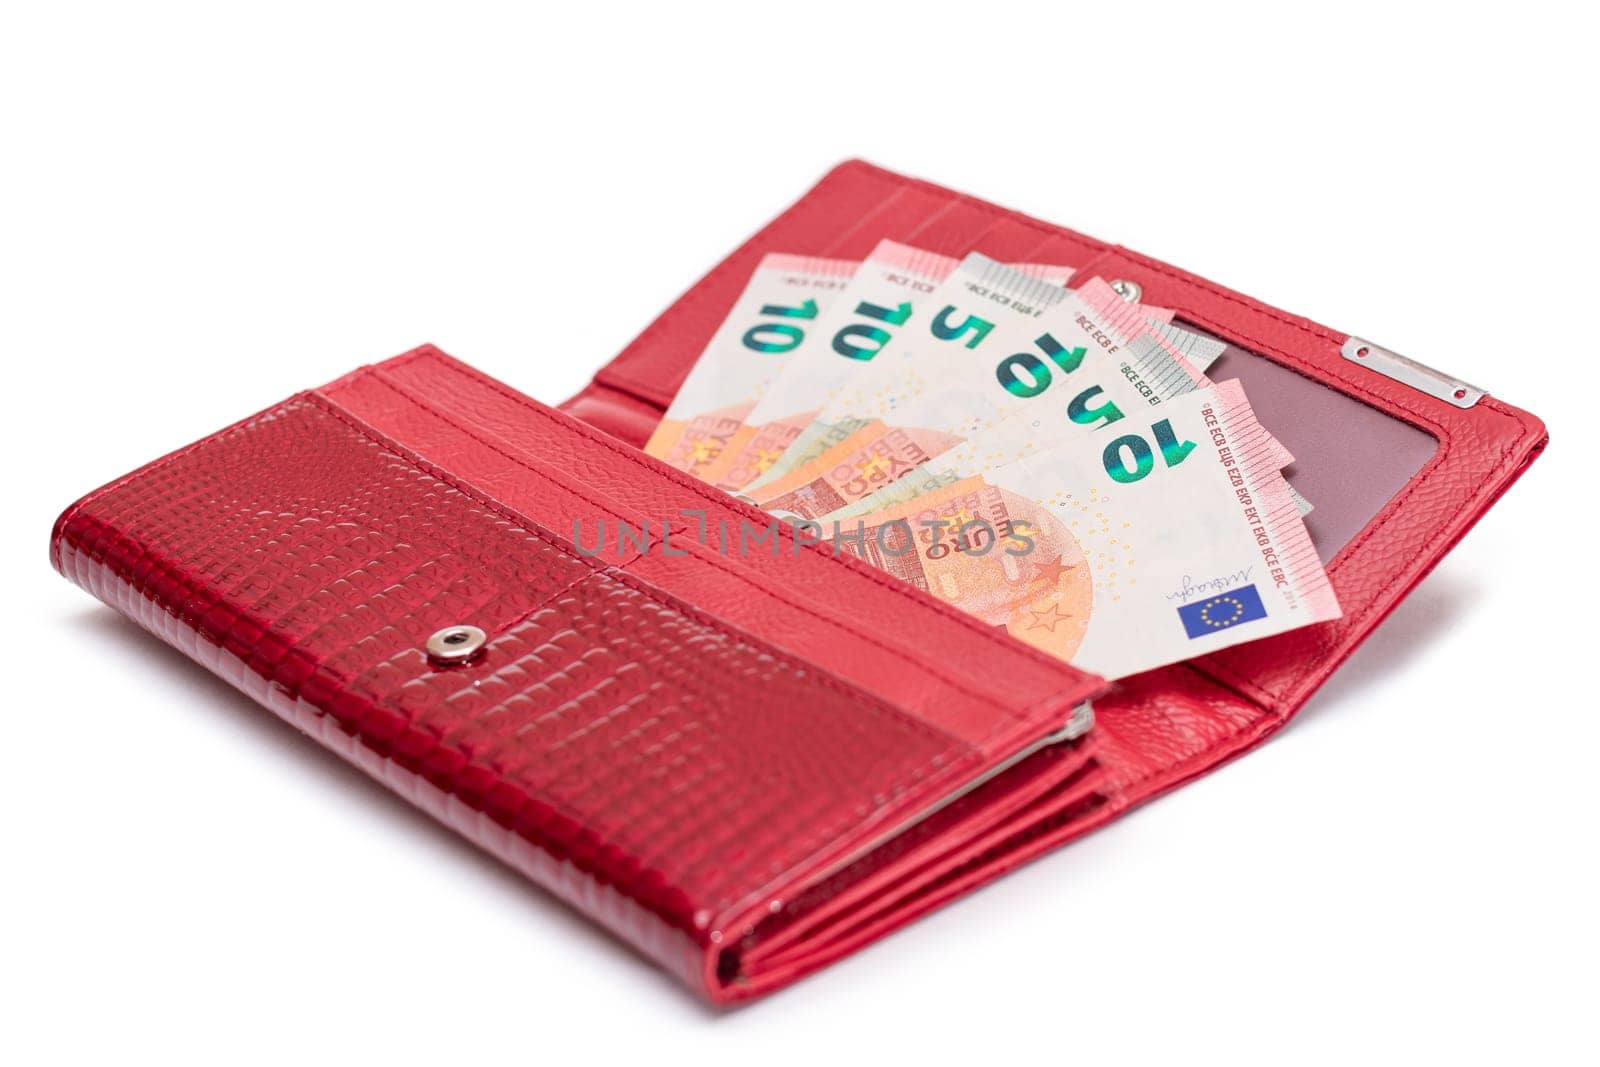 Opened Red Women Purse with 10 Euro Banknotes Inside - Isolated on White Background. A Wallet Full of Money Symbolizing Wealth, Success, Shopping and Social Status - Isolation